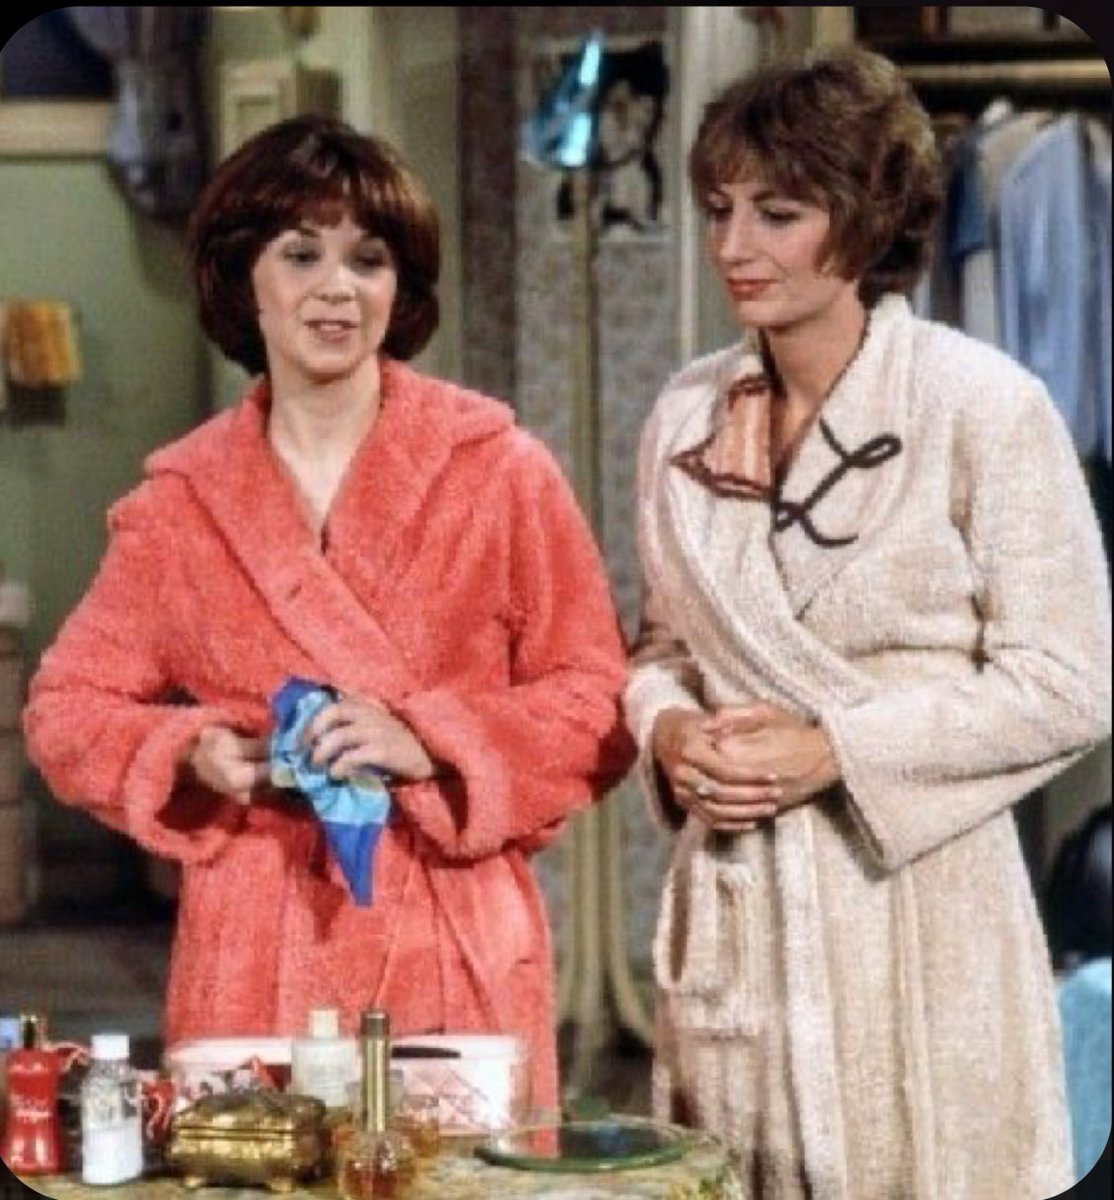 Good Morning my friends! ☀️

Trying to channel my inner Laverne on this Tuesday morning, but all I've got so far is a misplaced sock and a craving for milk and Pepsi. 🧦🥤 

Any Shirley out there to help me get it together? 🤣

#LaverneAndShirley #TuesdayTroubles